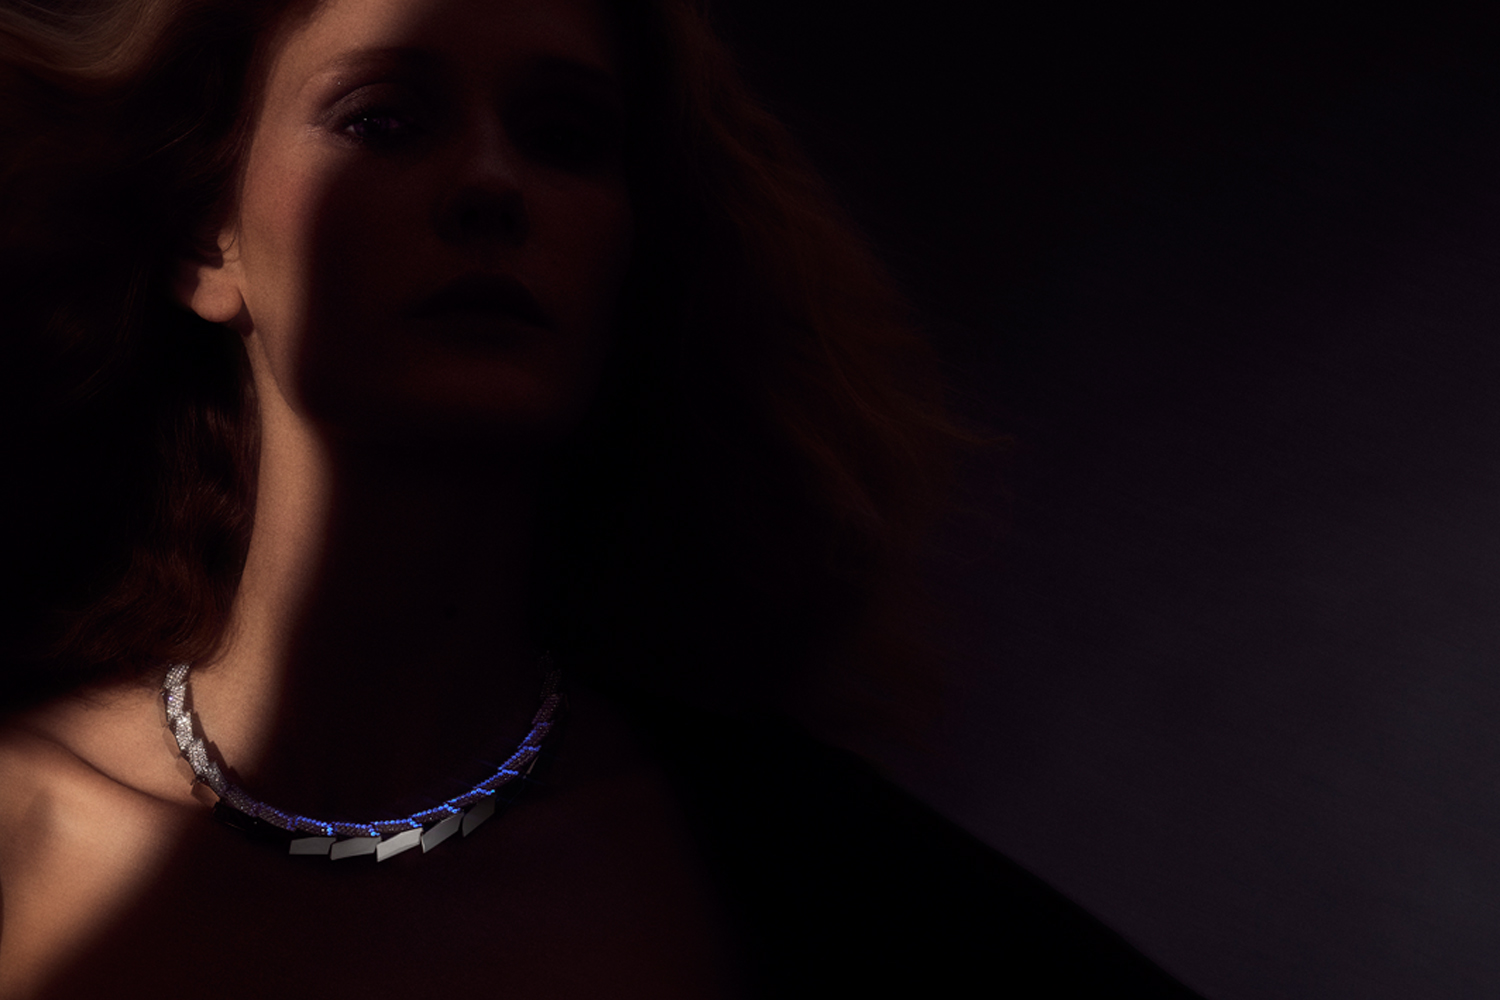 This is a close up dramatic color photo of a woman model wearing the Light Halo Necklace. She is mostly obscured in shadow with the platinum necklace glowing blue in black light. The design is by artist Sardwell for Renisis.